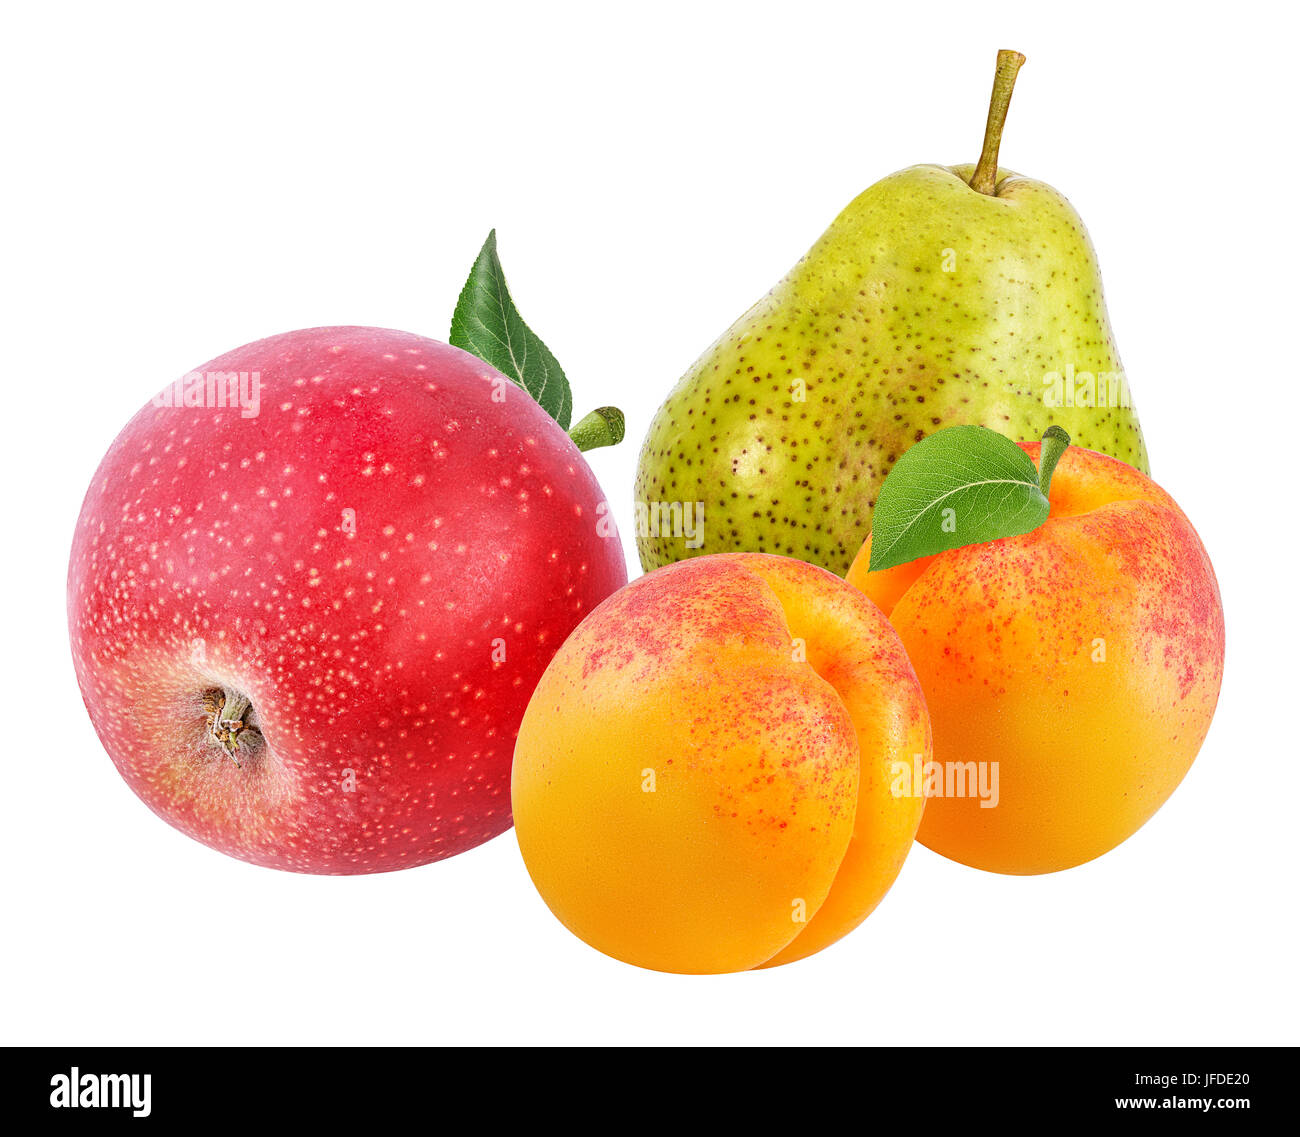 apples,apricot  and pear isolated on white background Stock Photo